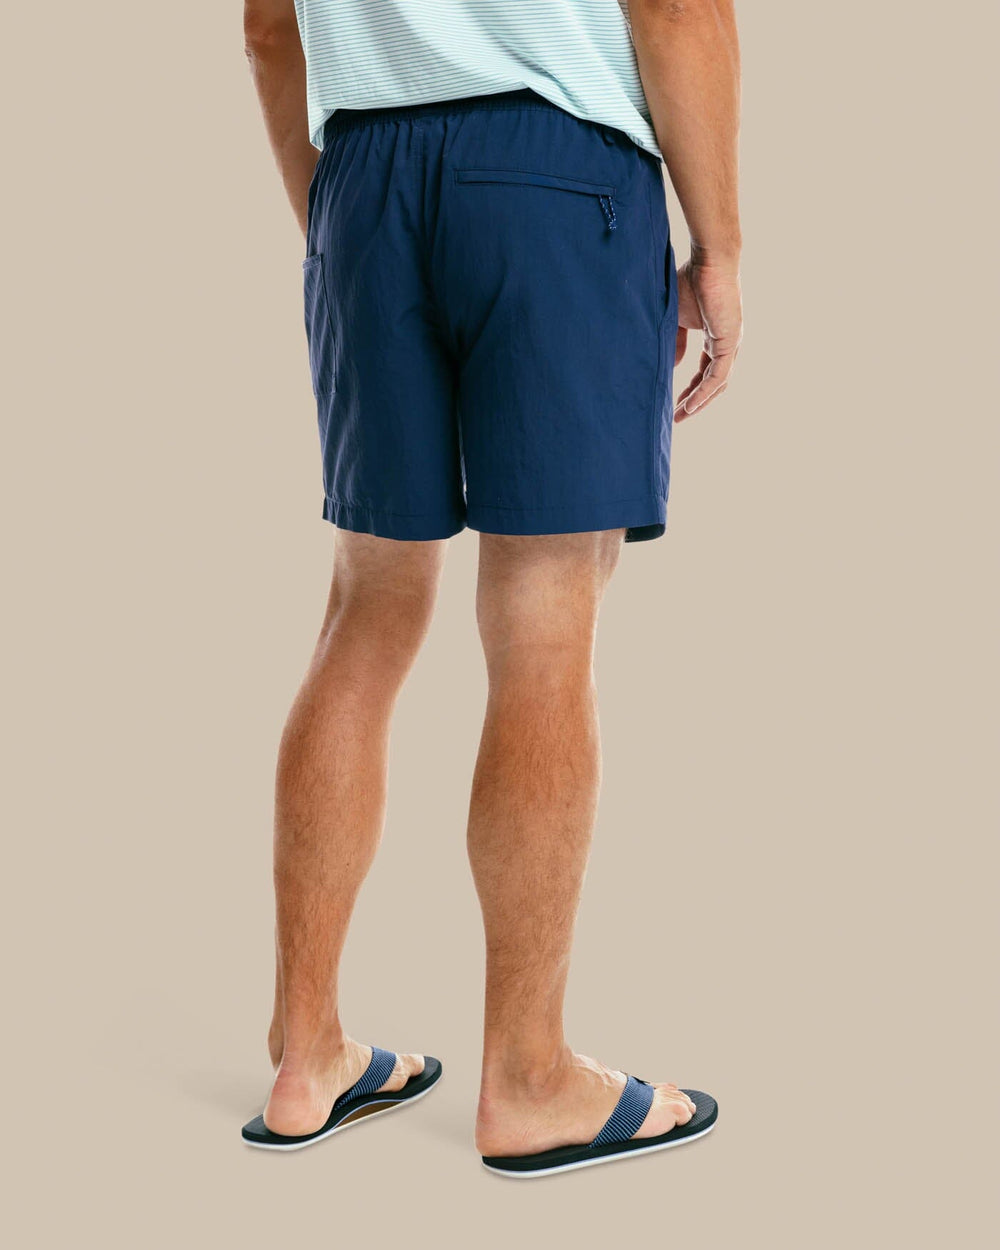 The model back view of the Men's Shoreline 6 Inch Short by Southern Tide  - True Navy